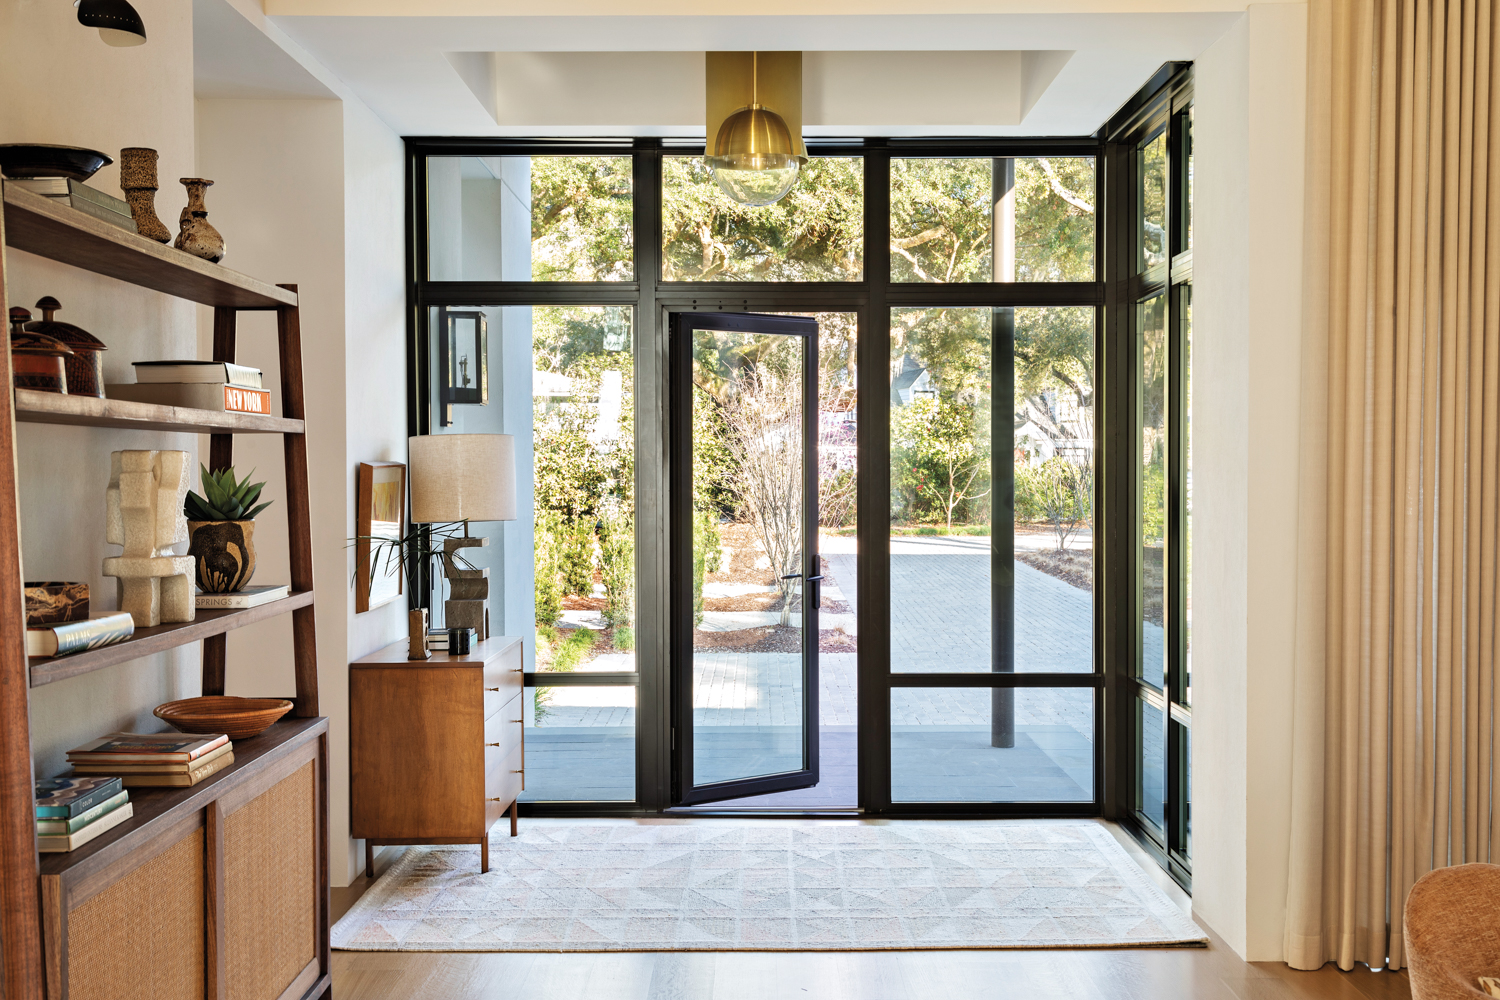 Metal windows and doors allow sunlight to fill a foyer with midcentury-inspired furnishings and lighting